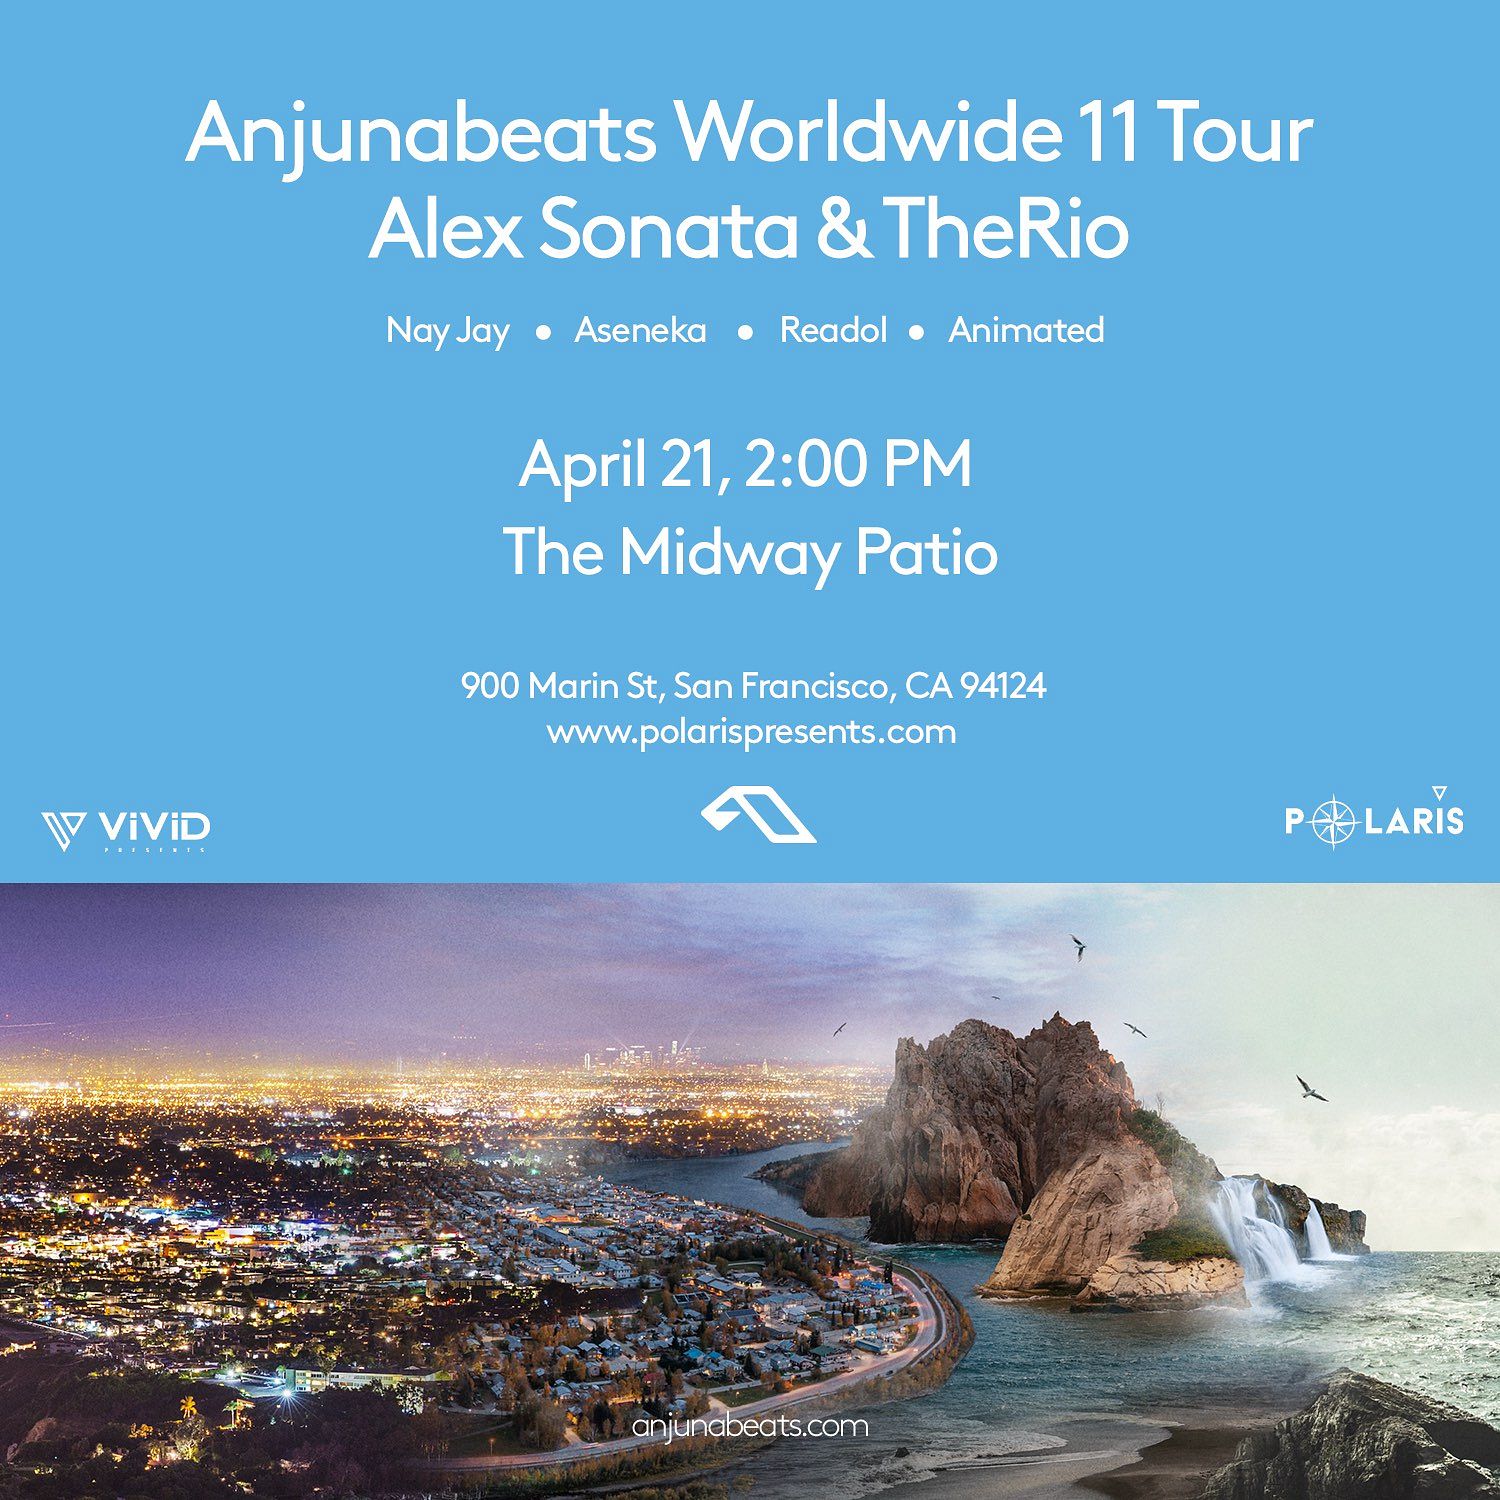 Anjunabeats Worldwide 11 Tour: Alex Sonata & TheRio Tickets at The 